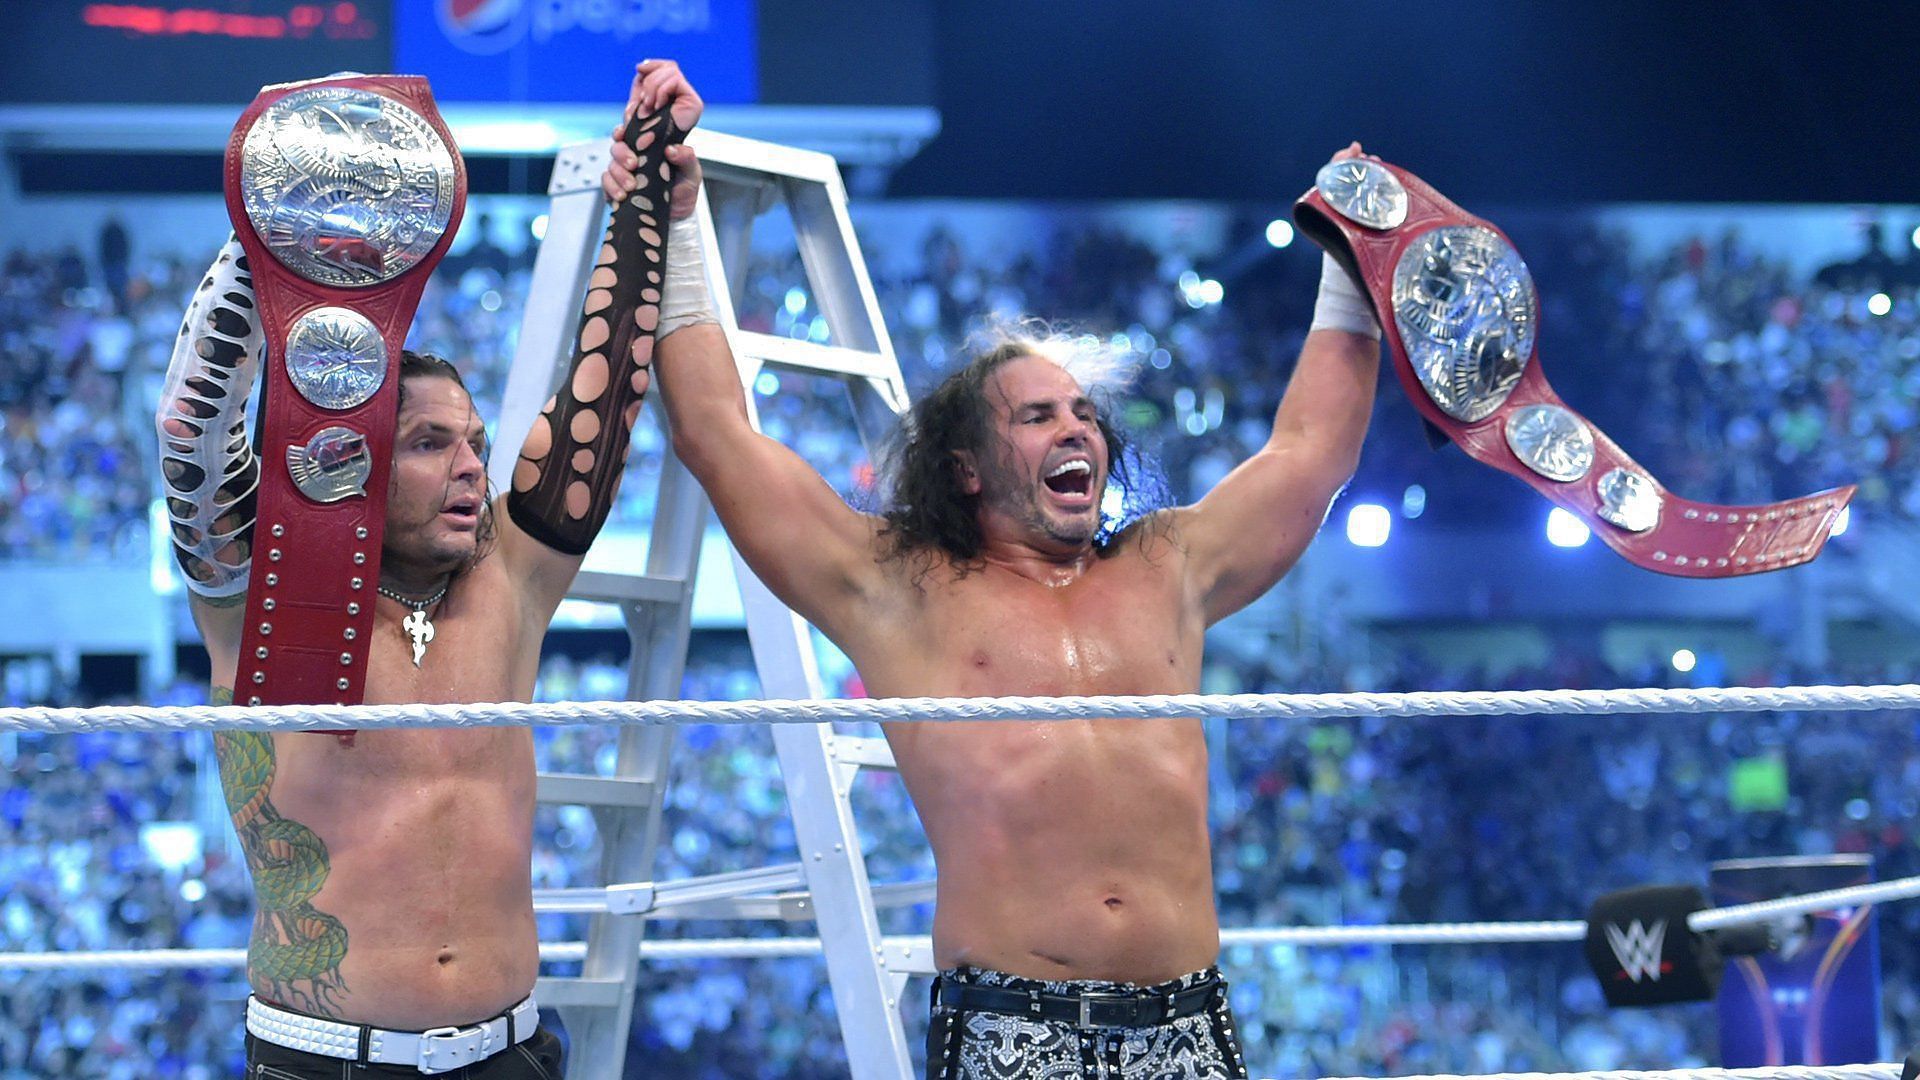 The Hardys return to WWE at WrestleMania 33 and win the RAW Tag Team Championship